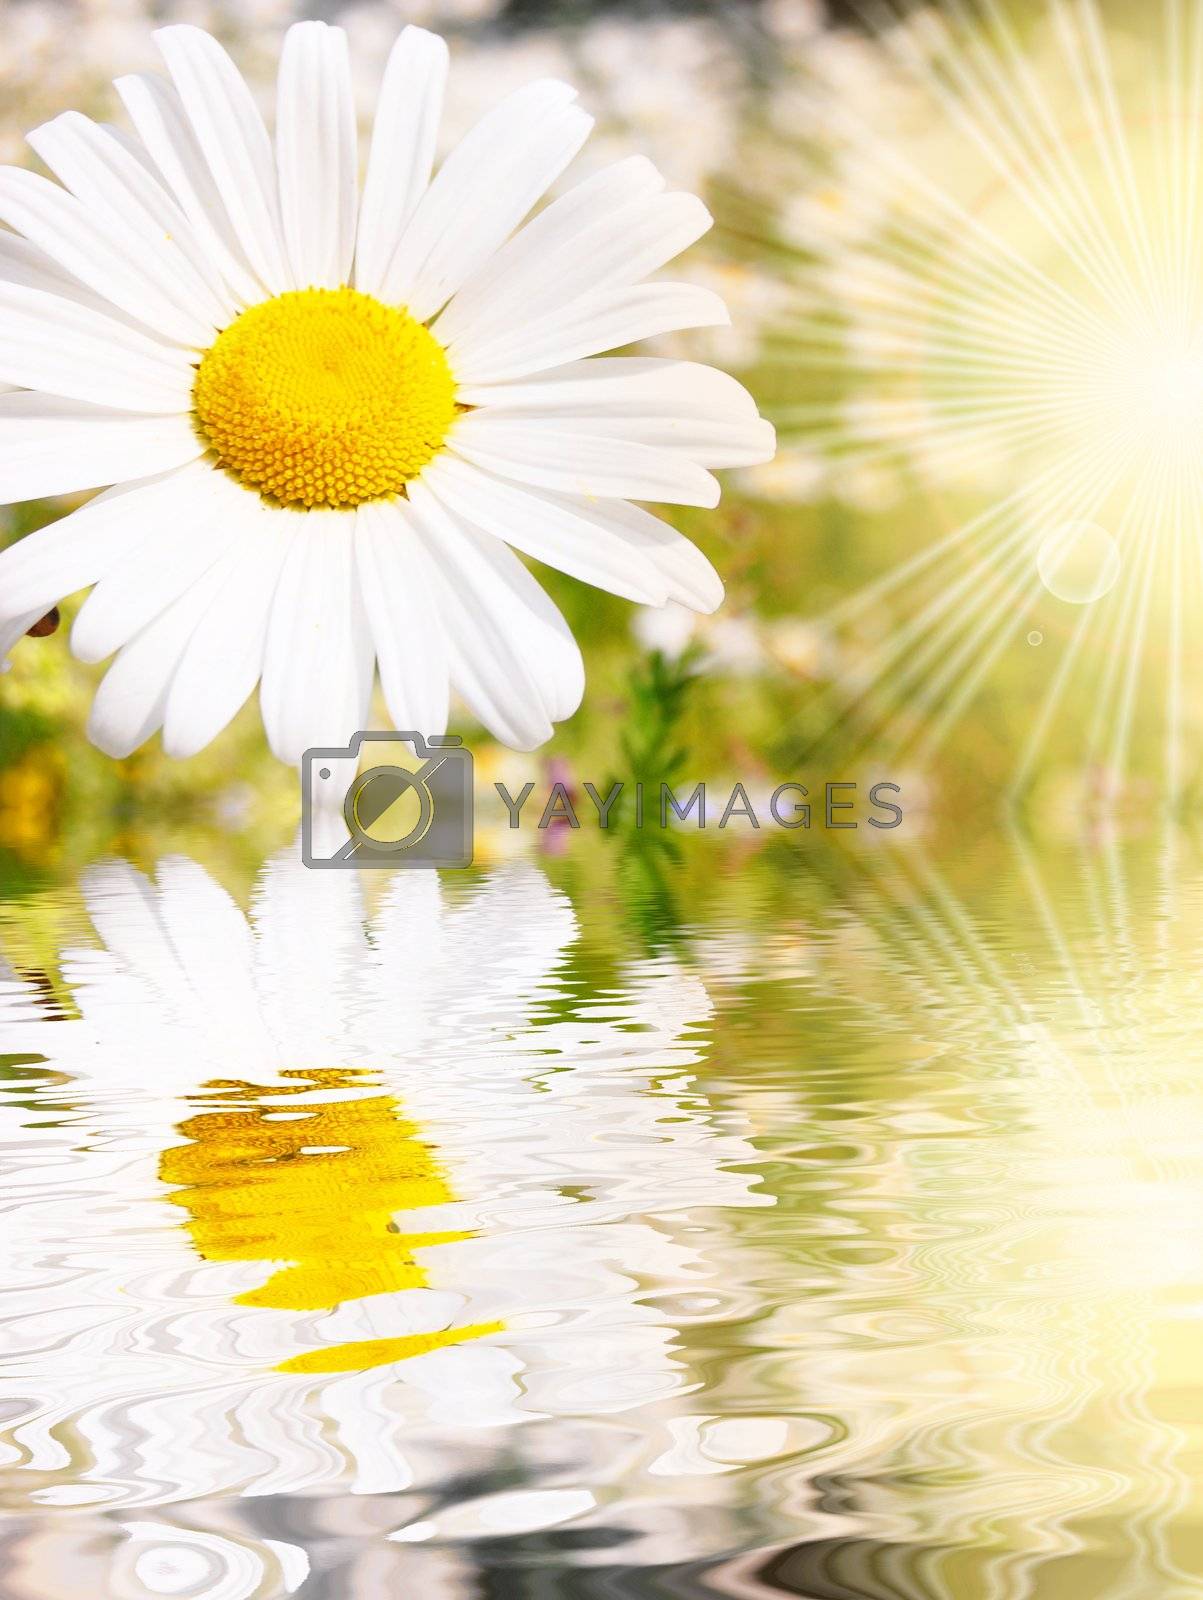 Royalty free image of flowers by gunnar3000